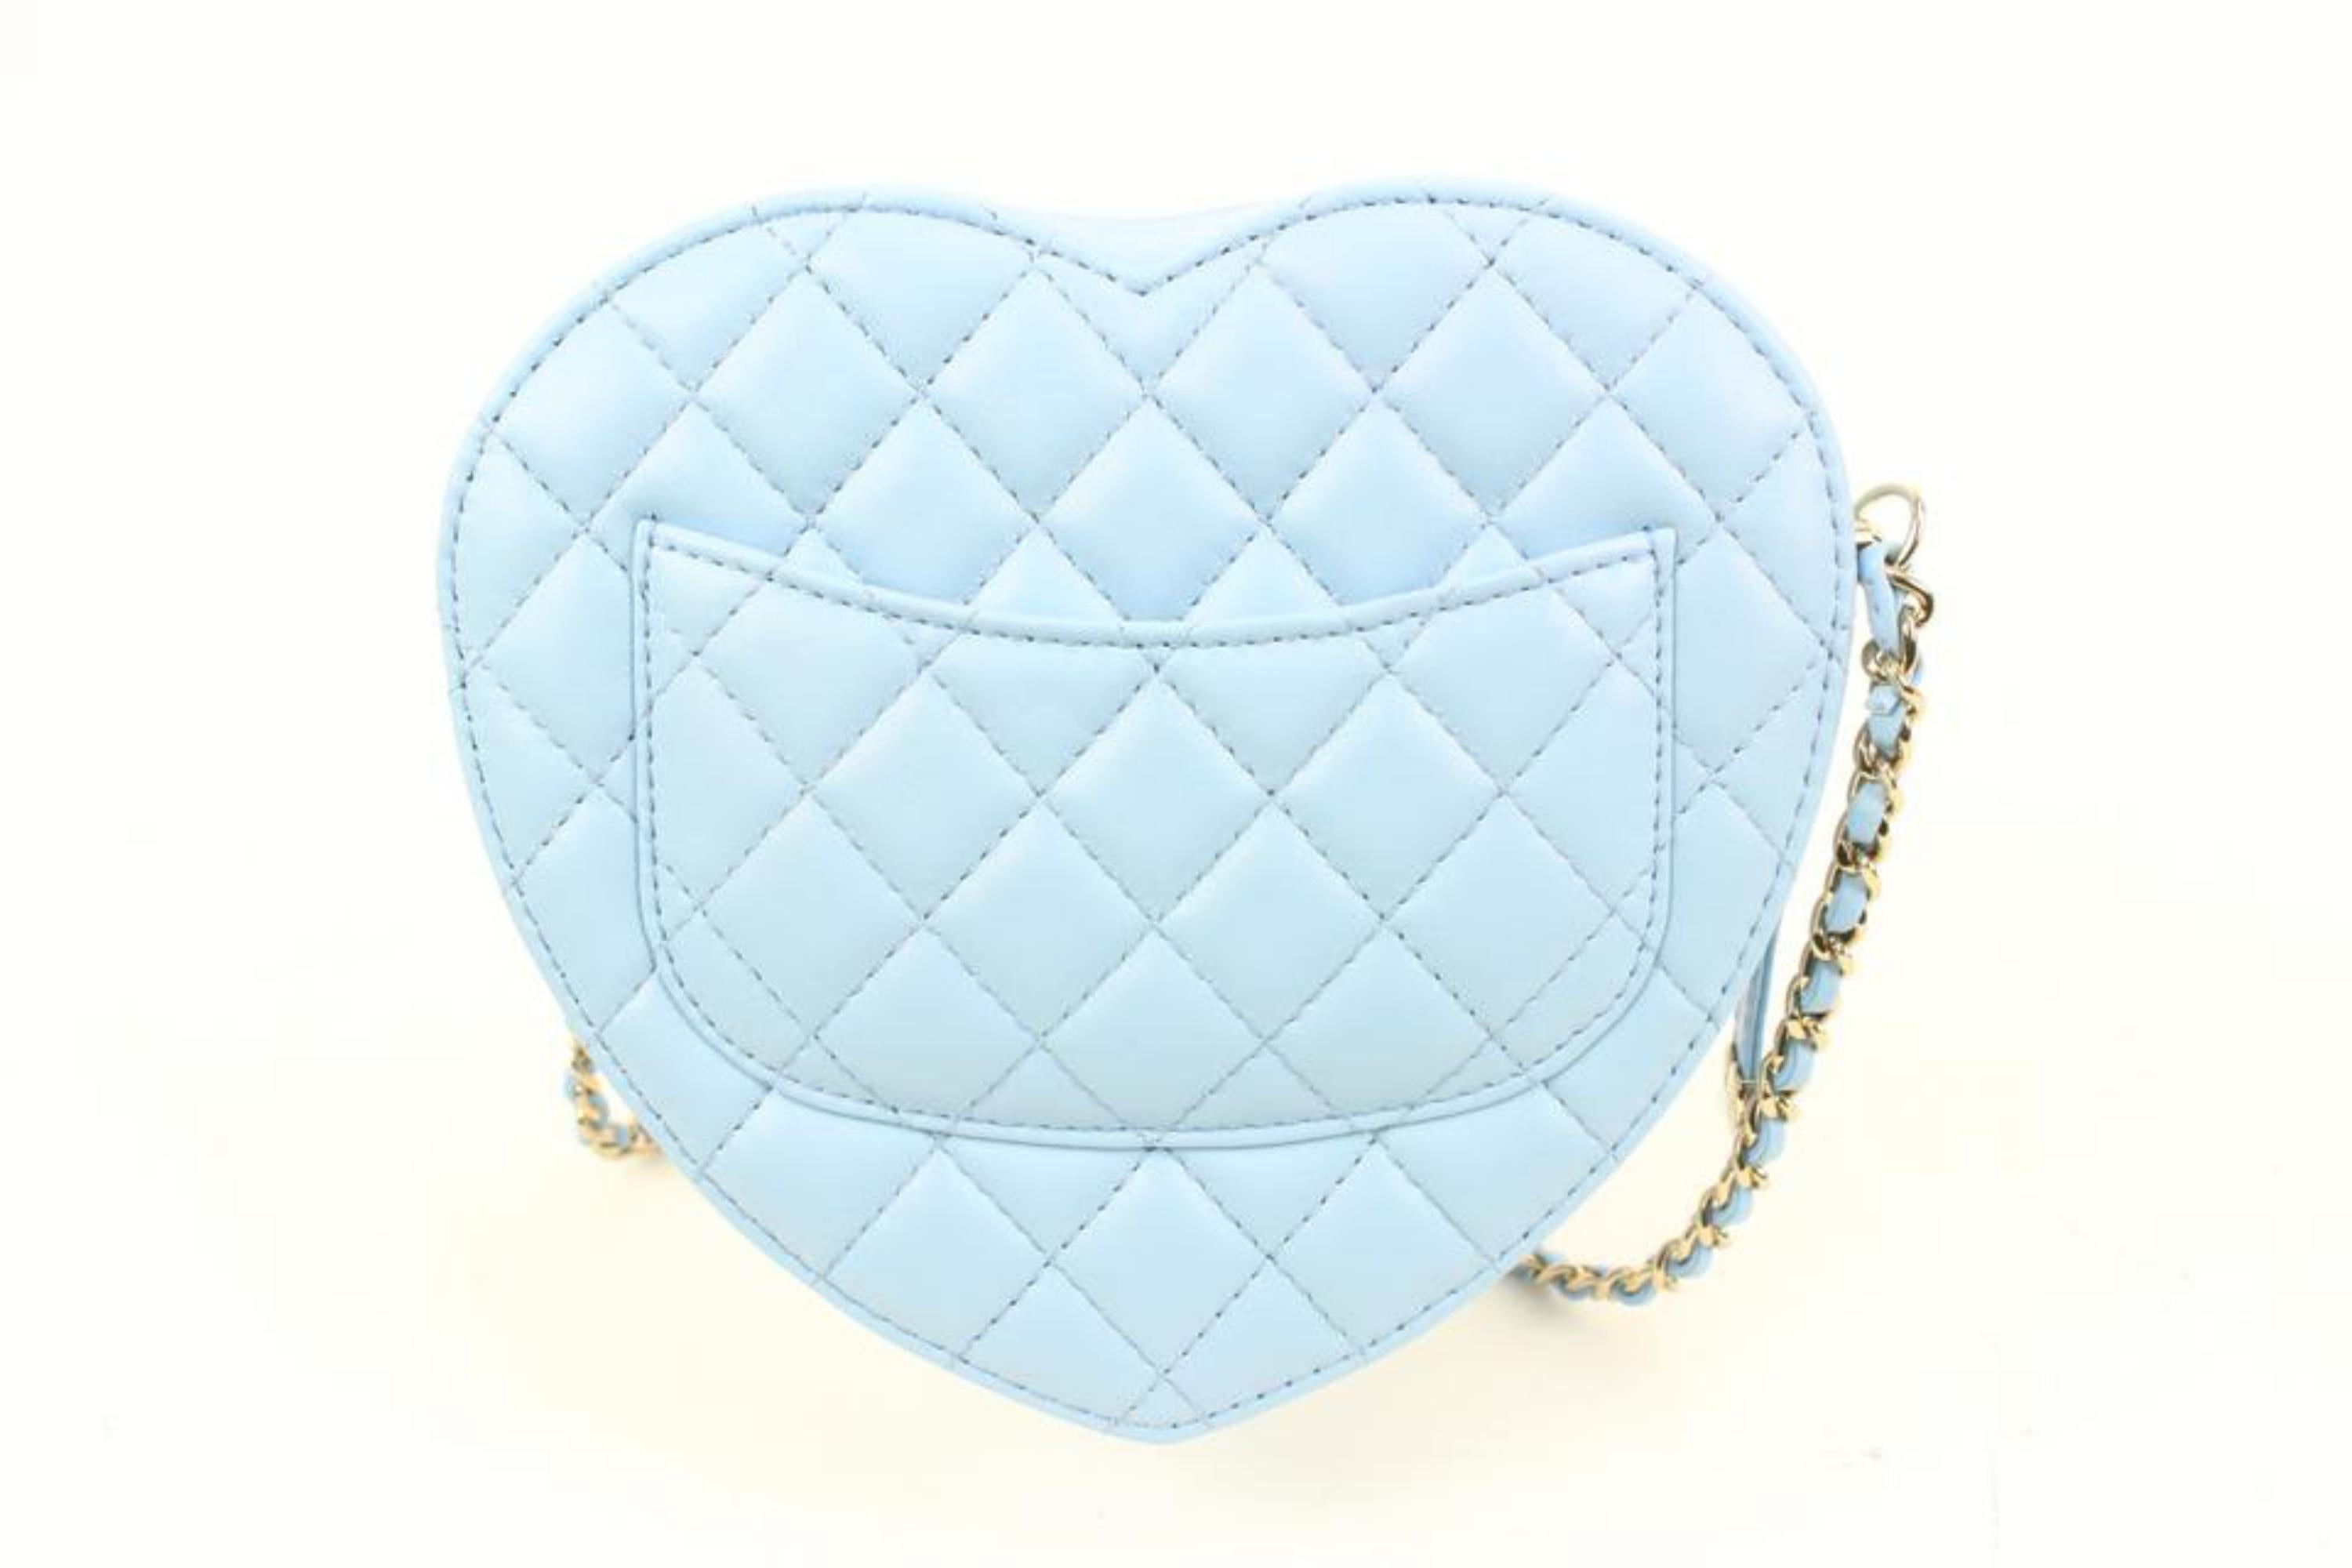 Chanel 22s Blue Quilted Lambskin CC in Love Large Heart Bag GHW 10cz426s In New Condition For Sale In Dix hills, NY